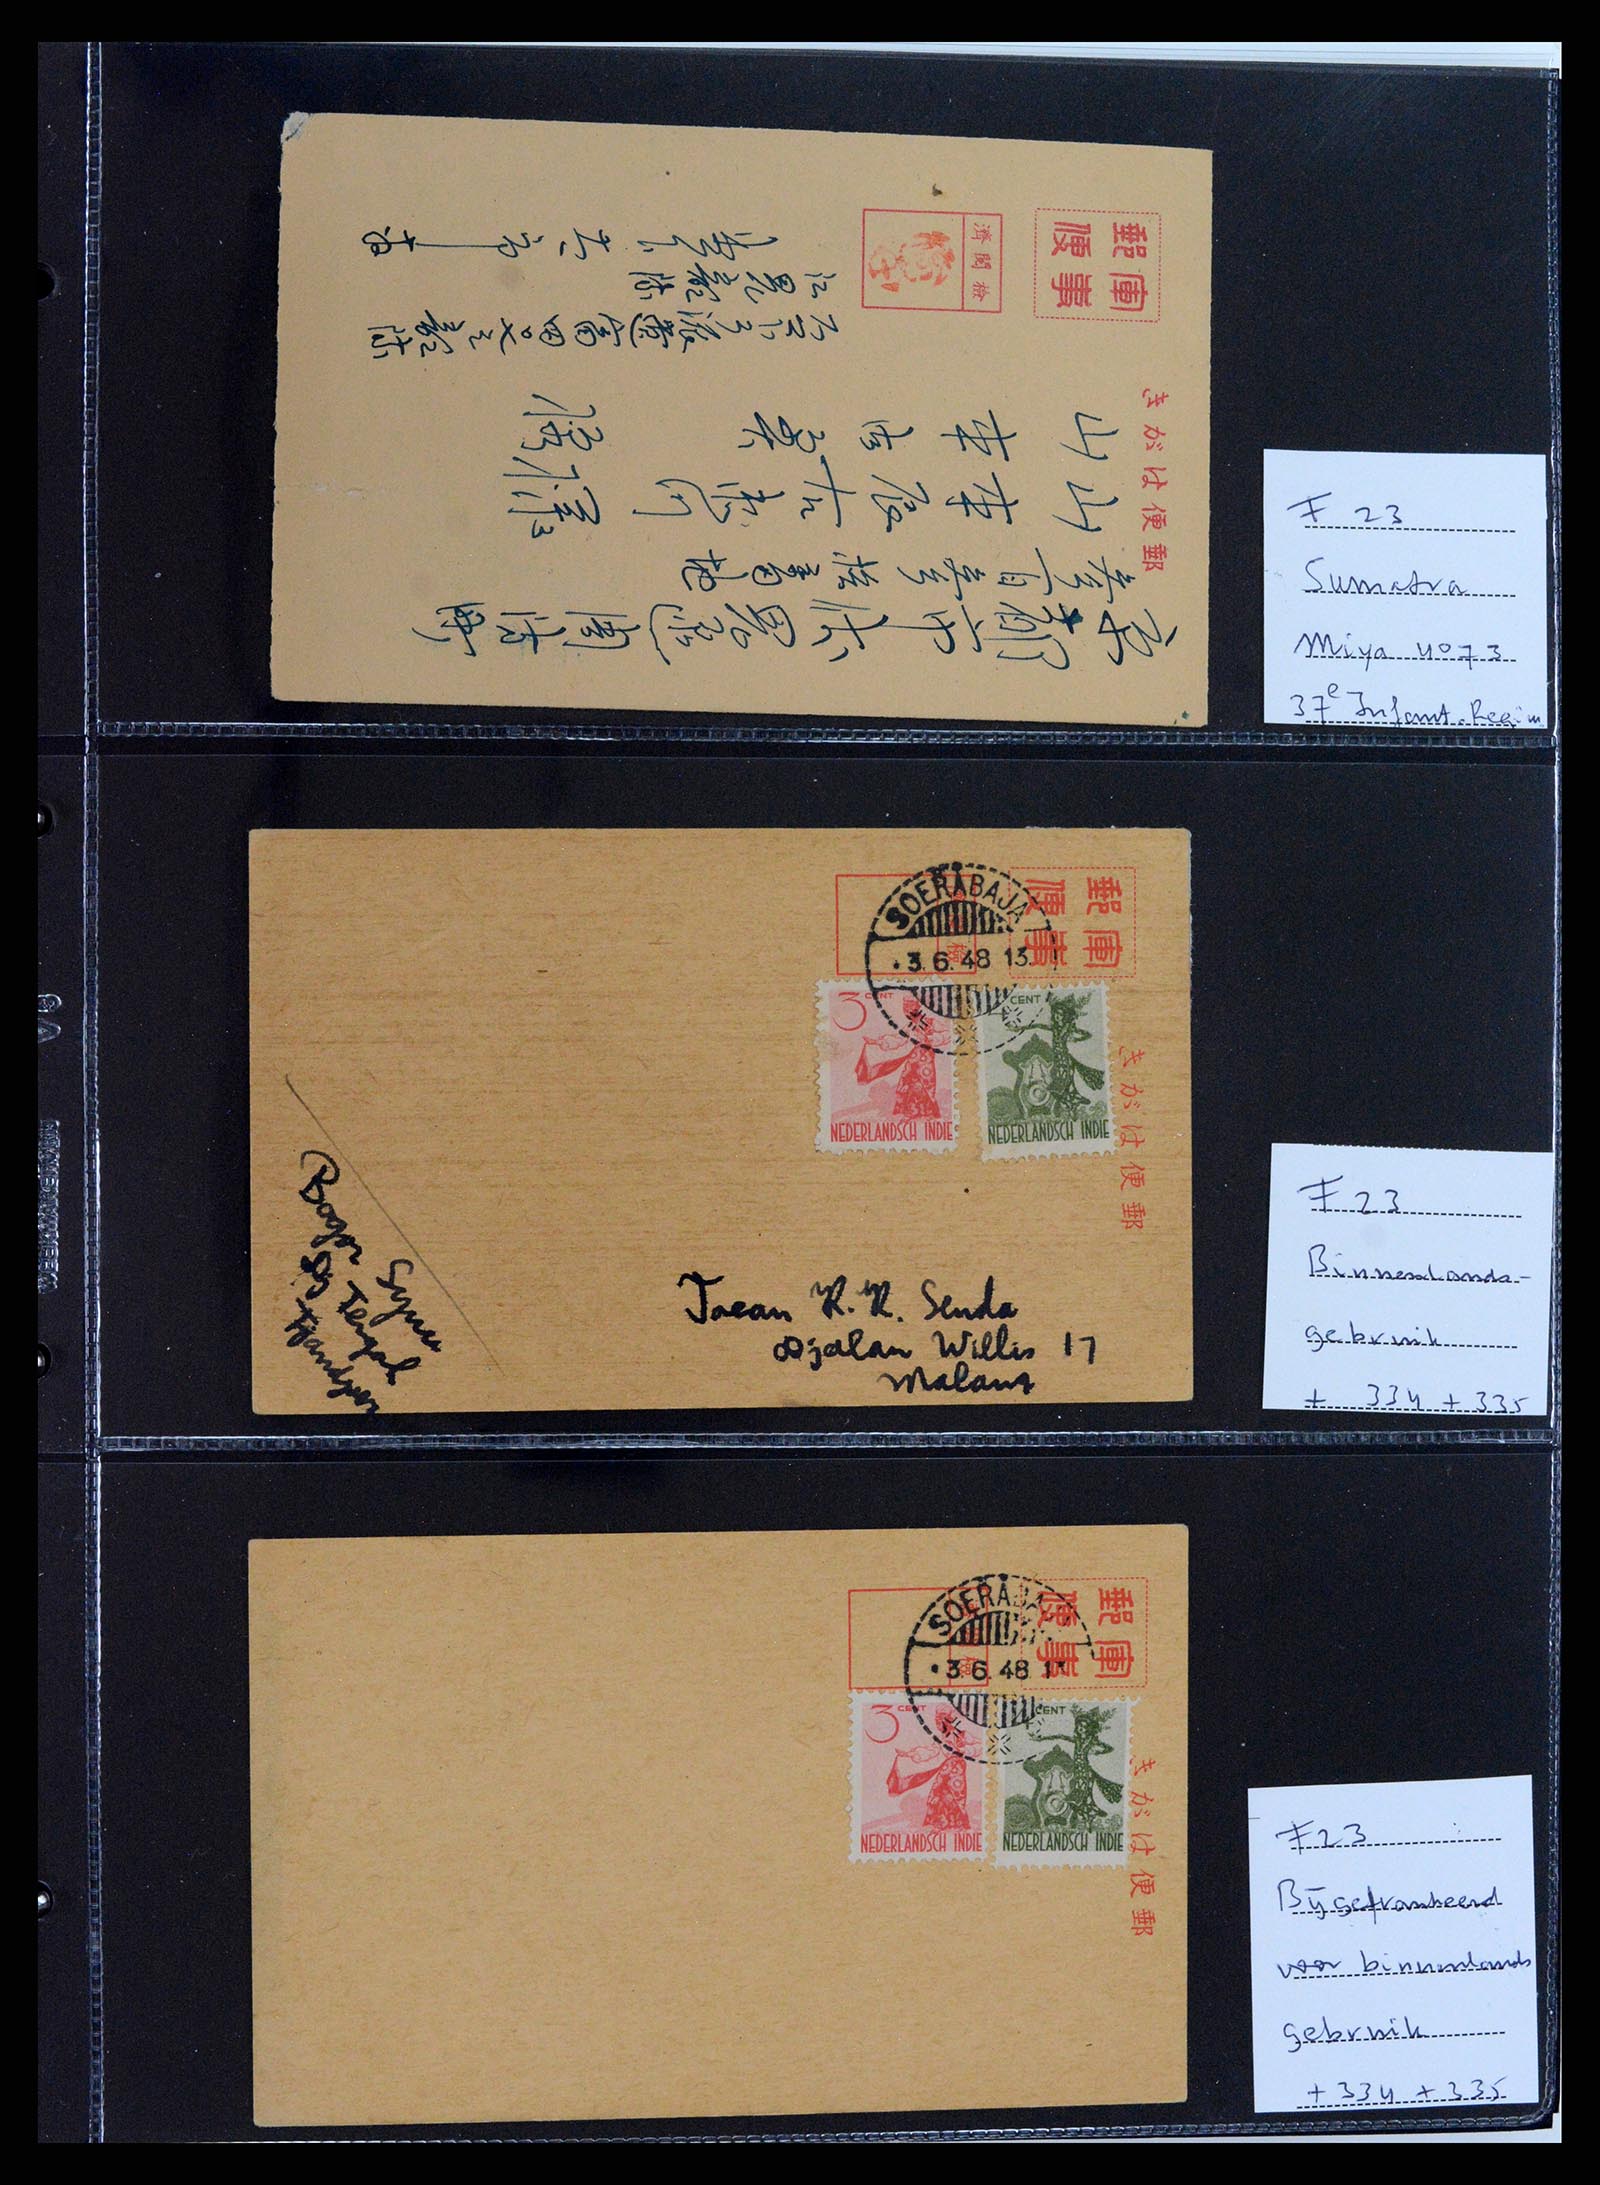 37423 010 - Stamp collection 37423 Dutch Indies Japanese occupation covers 1942-1945